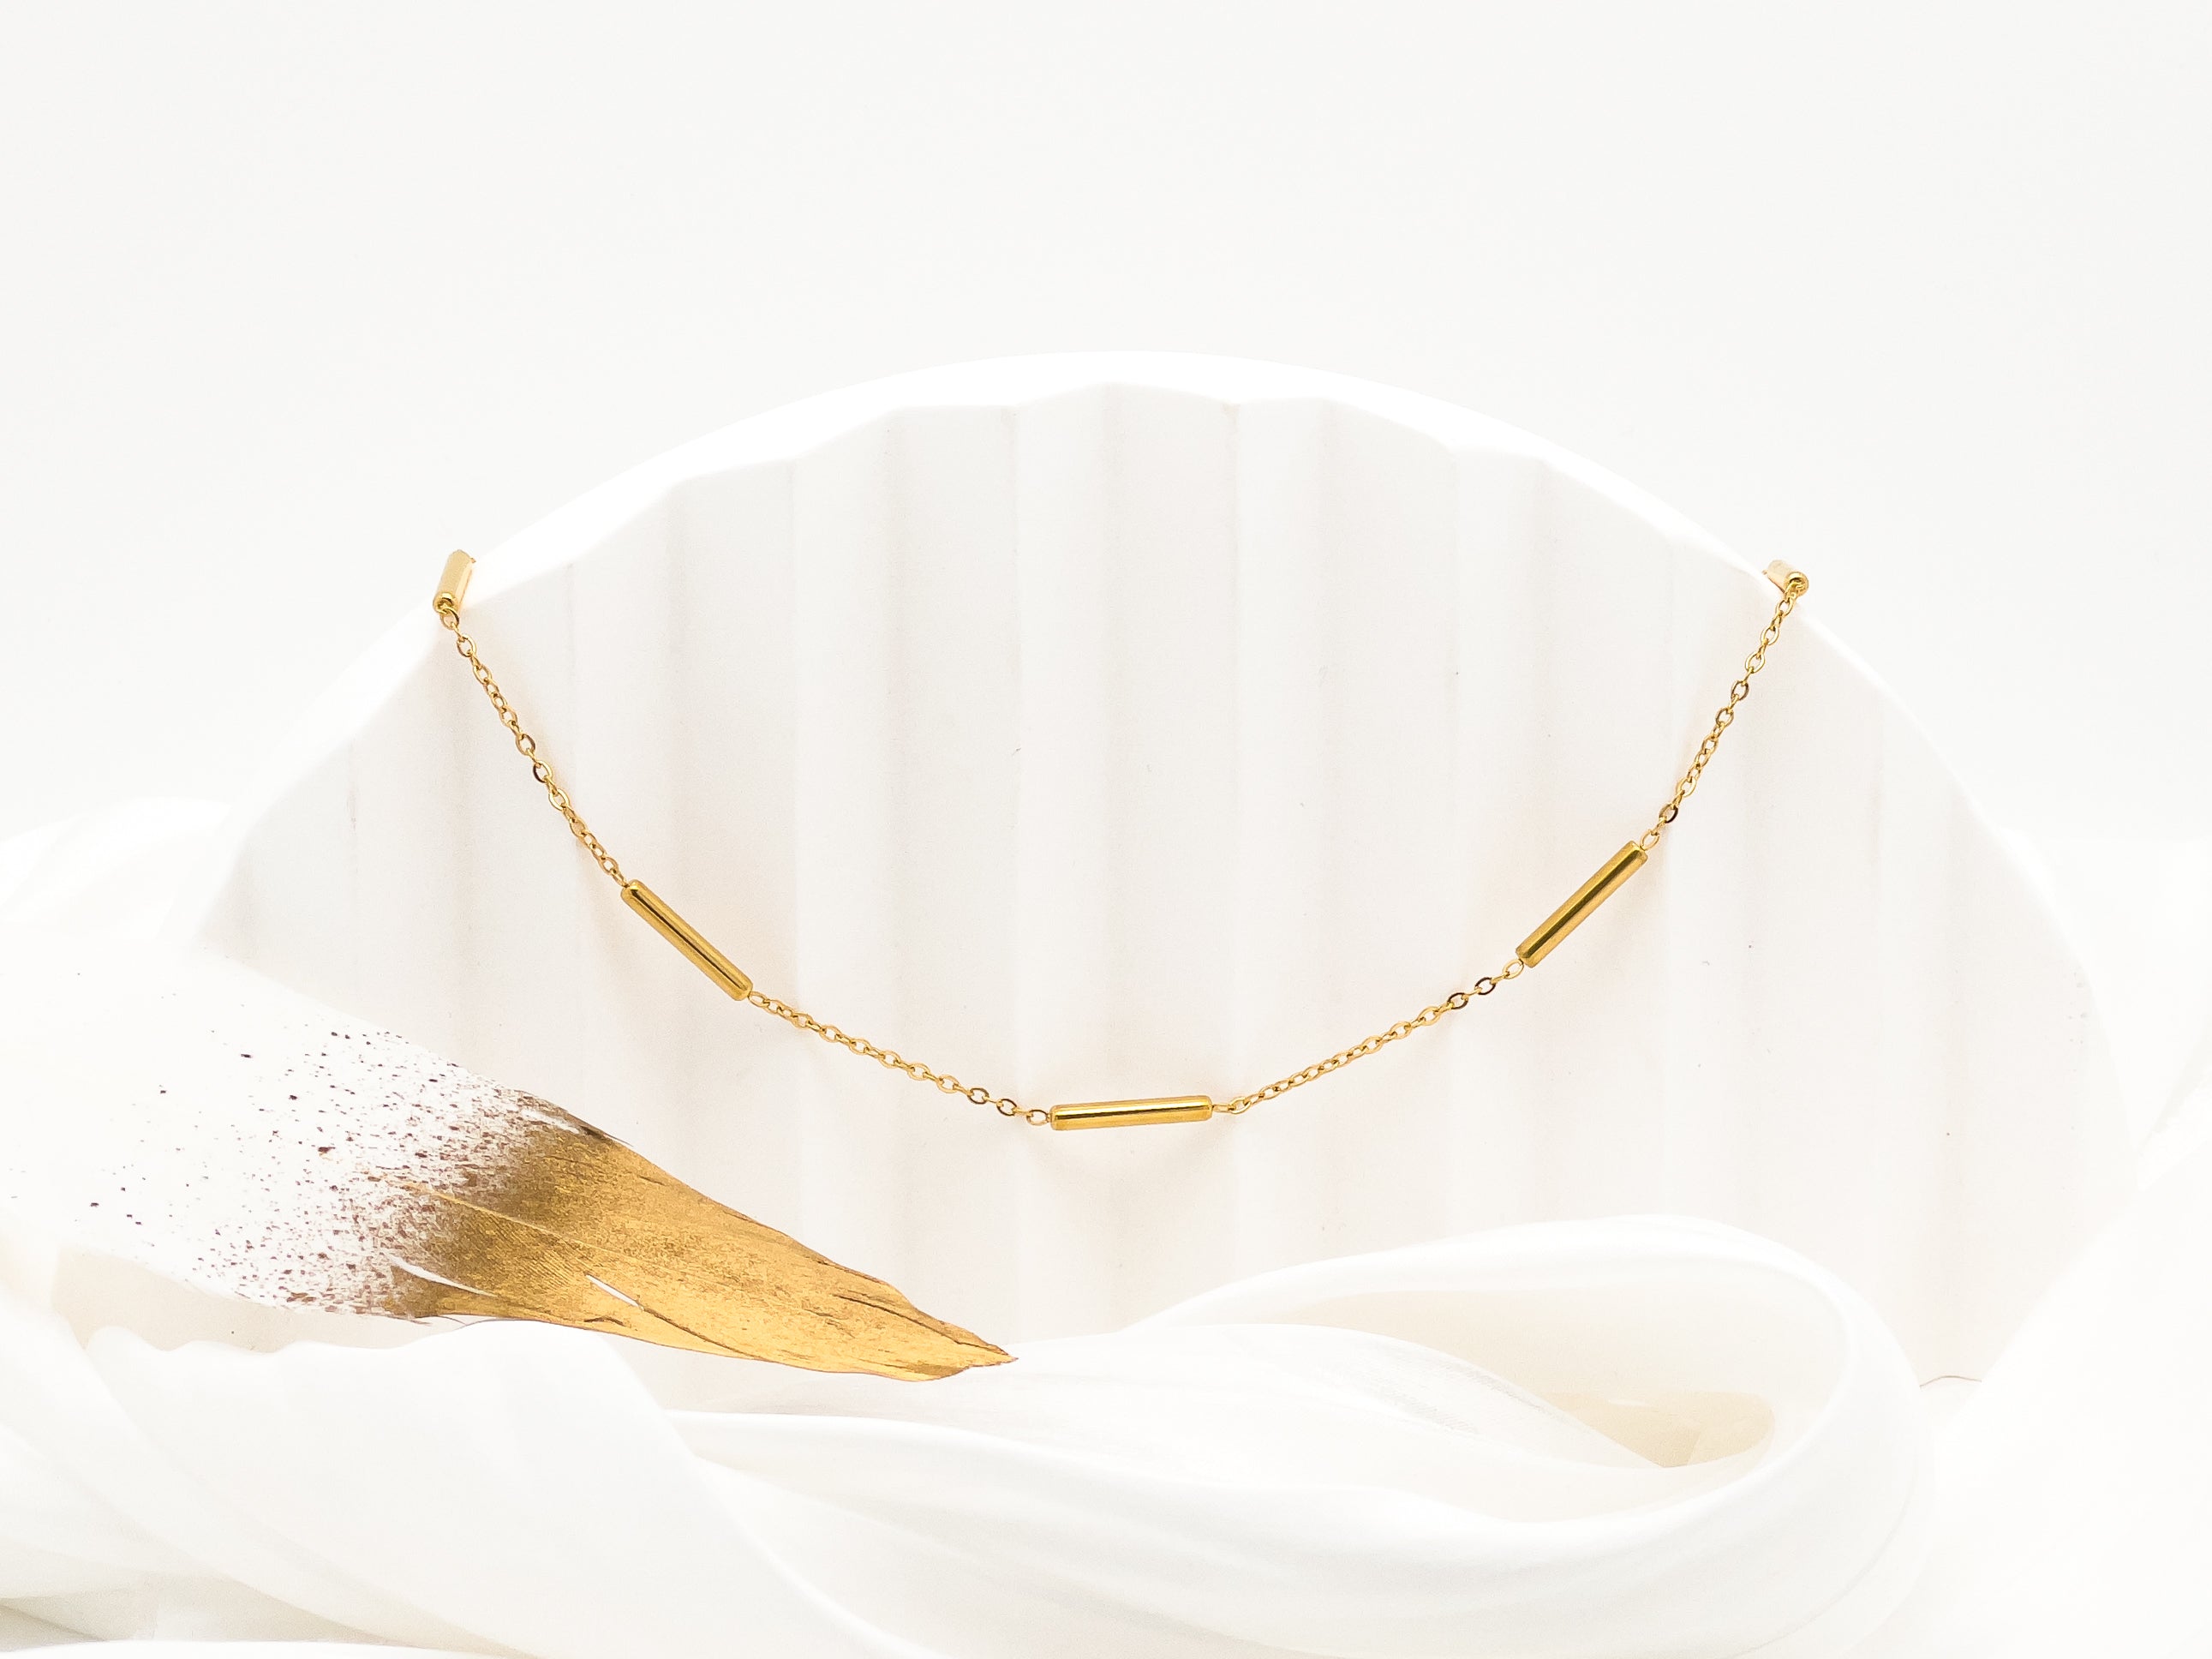 Priscilla Joint Gold Chain Necklace - Everyday Jewelry | Chic Chic Bon